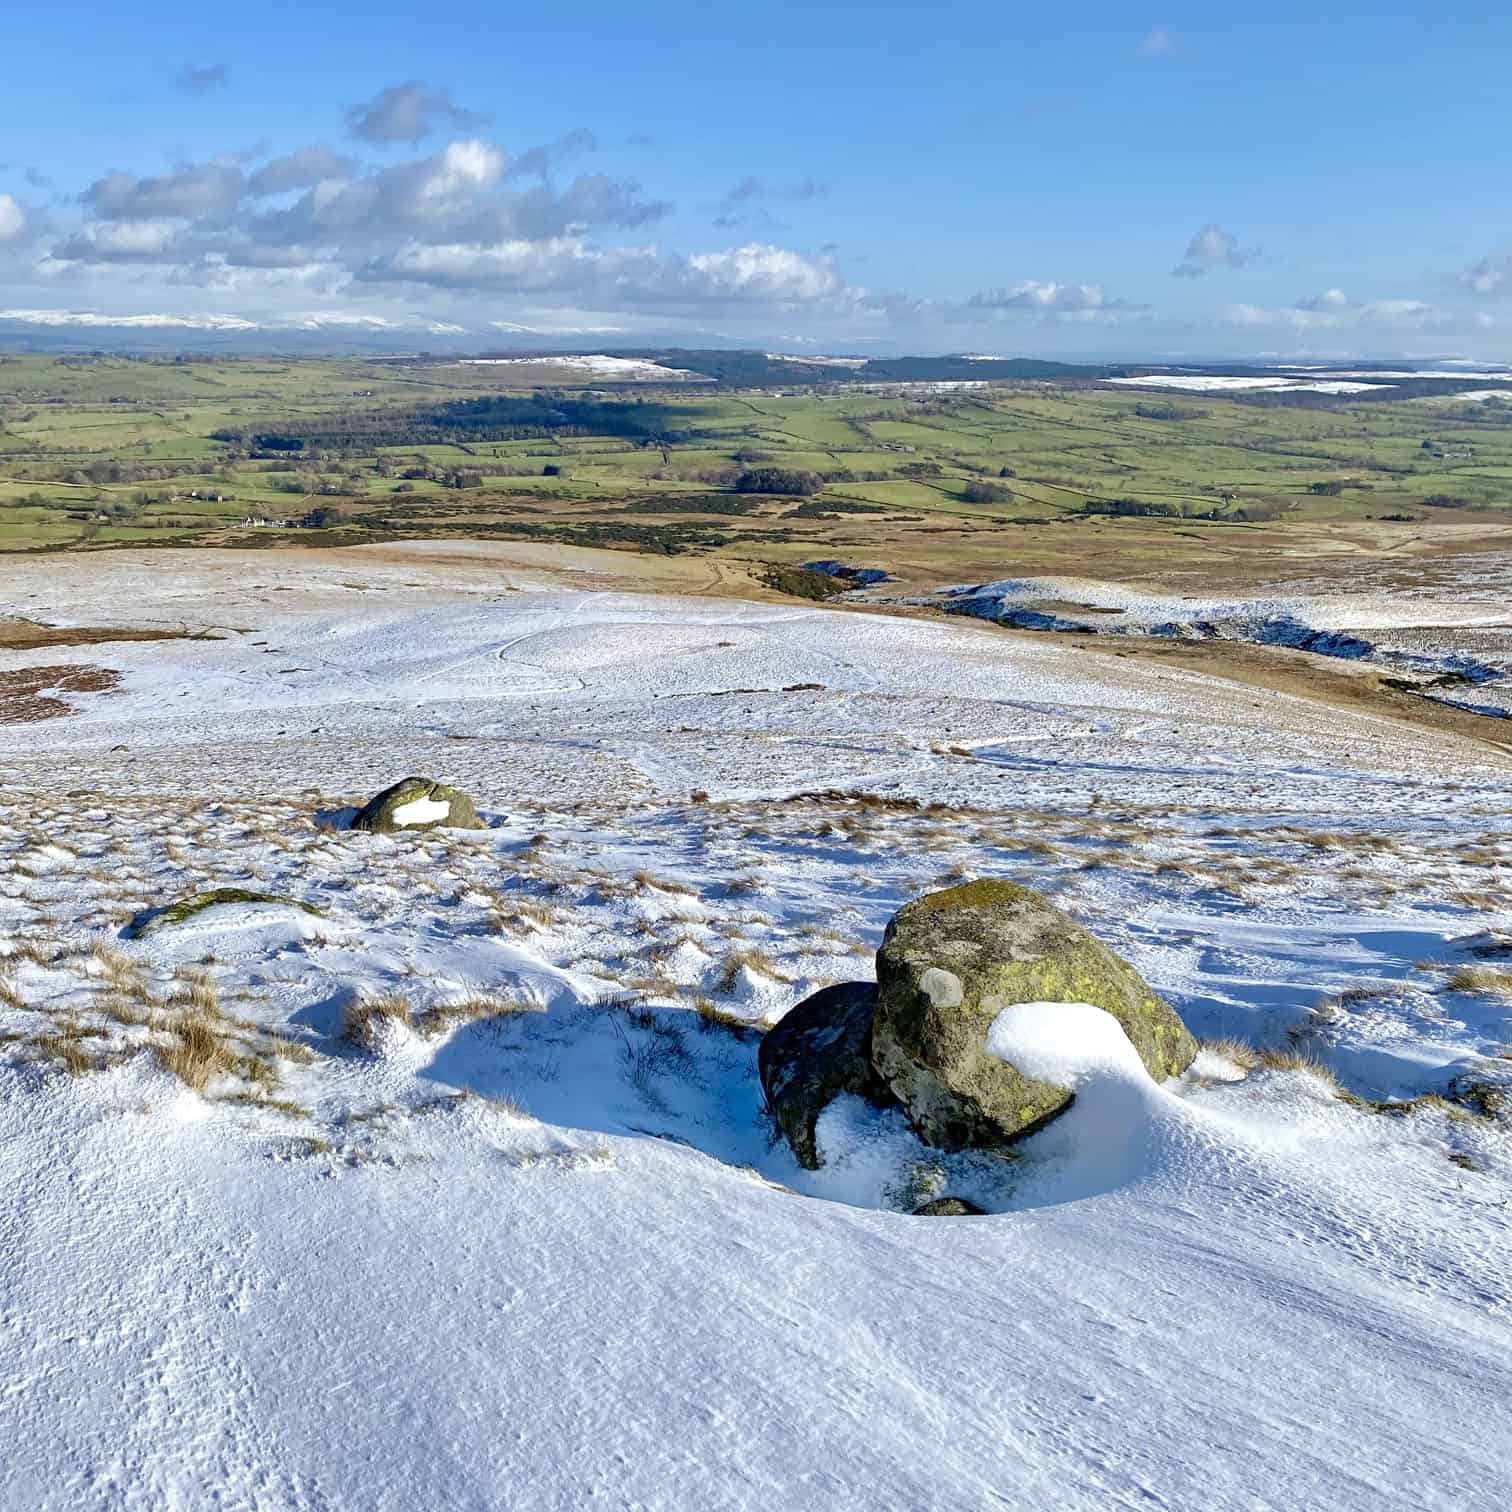 The view east from West Fell. On the horizon on the left of the photo the snow-covered mountains of the North Pennines are lit up by the sun.